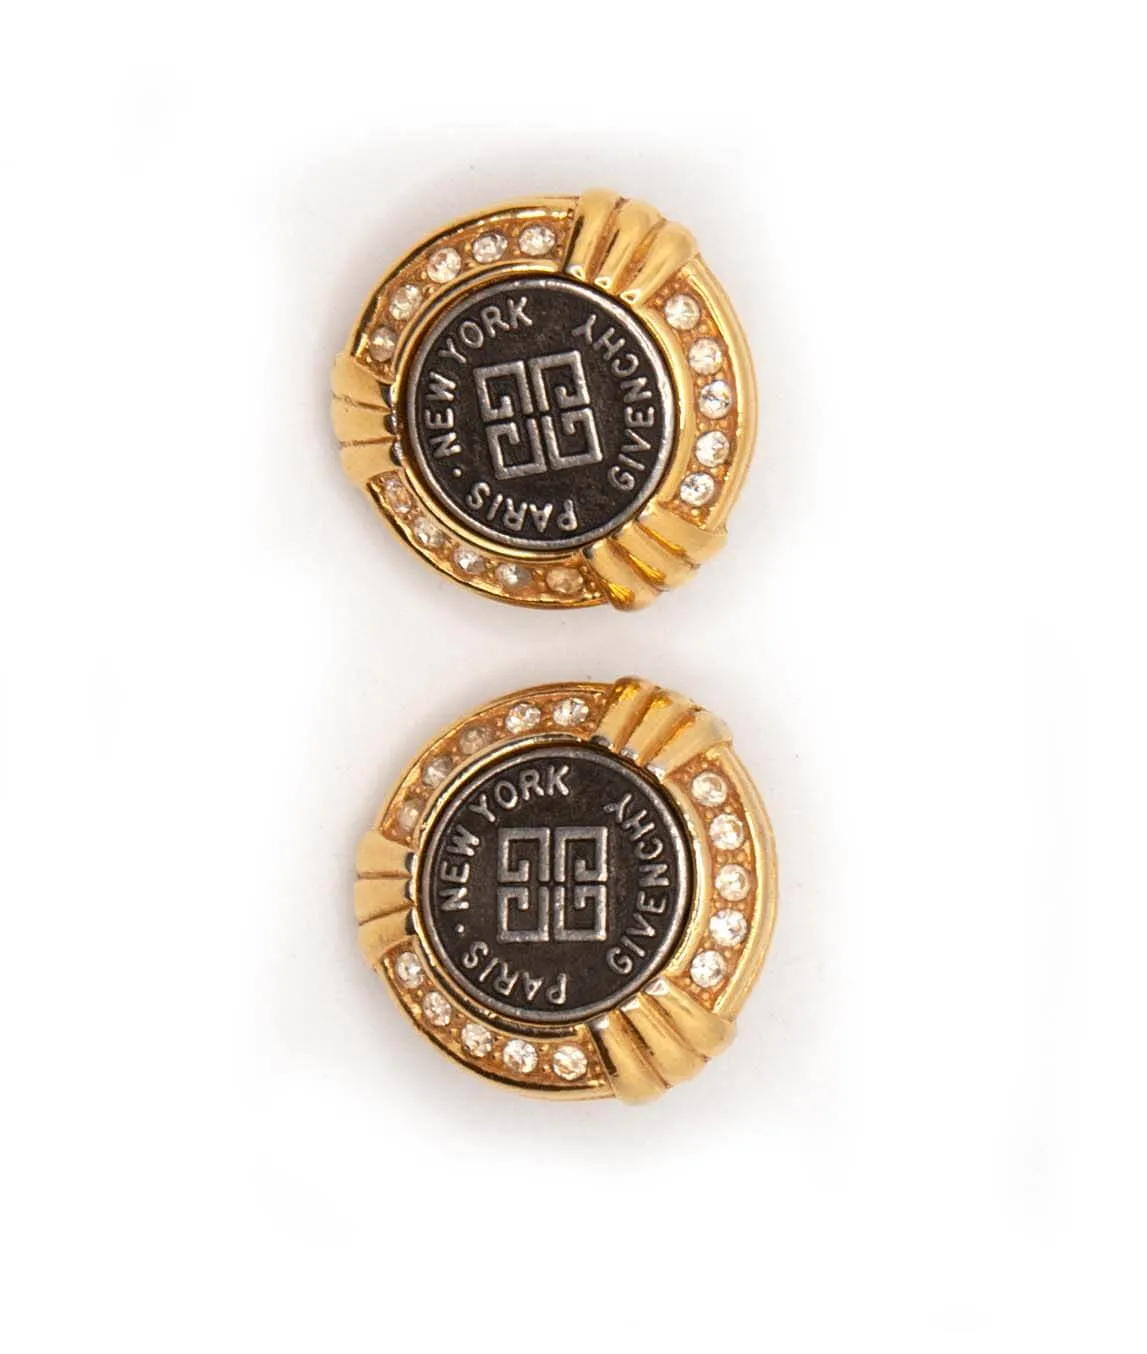 Vintage Givenchy logo earrings gold and crystal